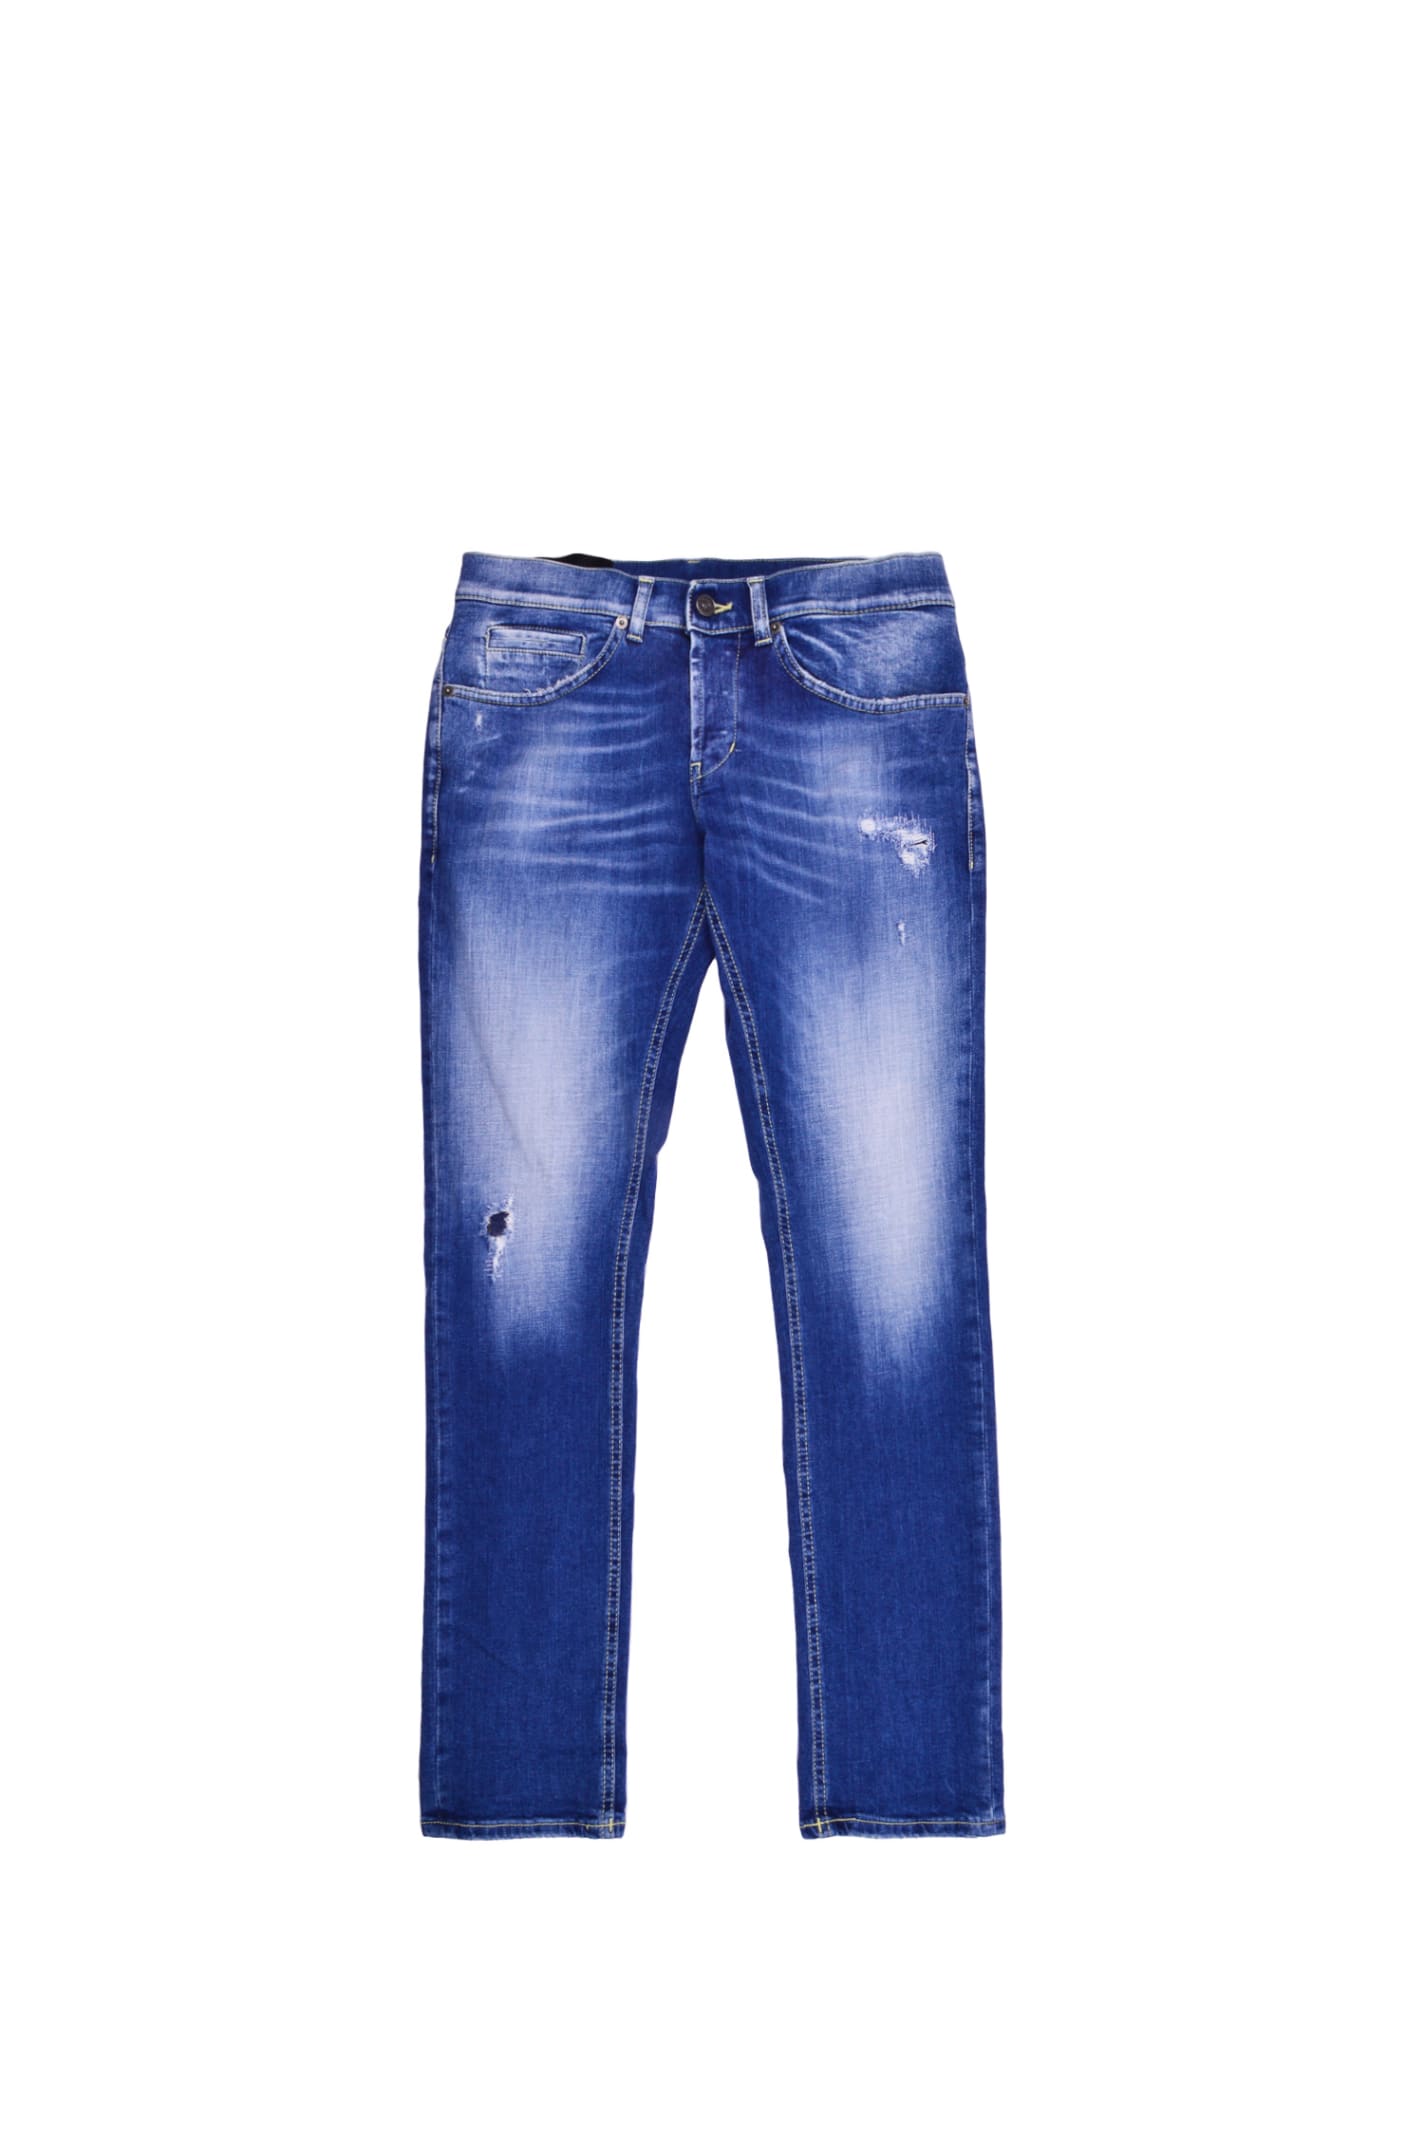 Dondup Tapered Cotton Jeans